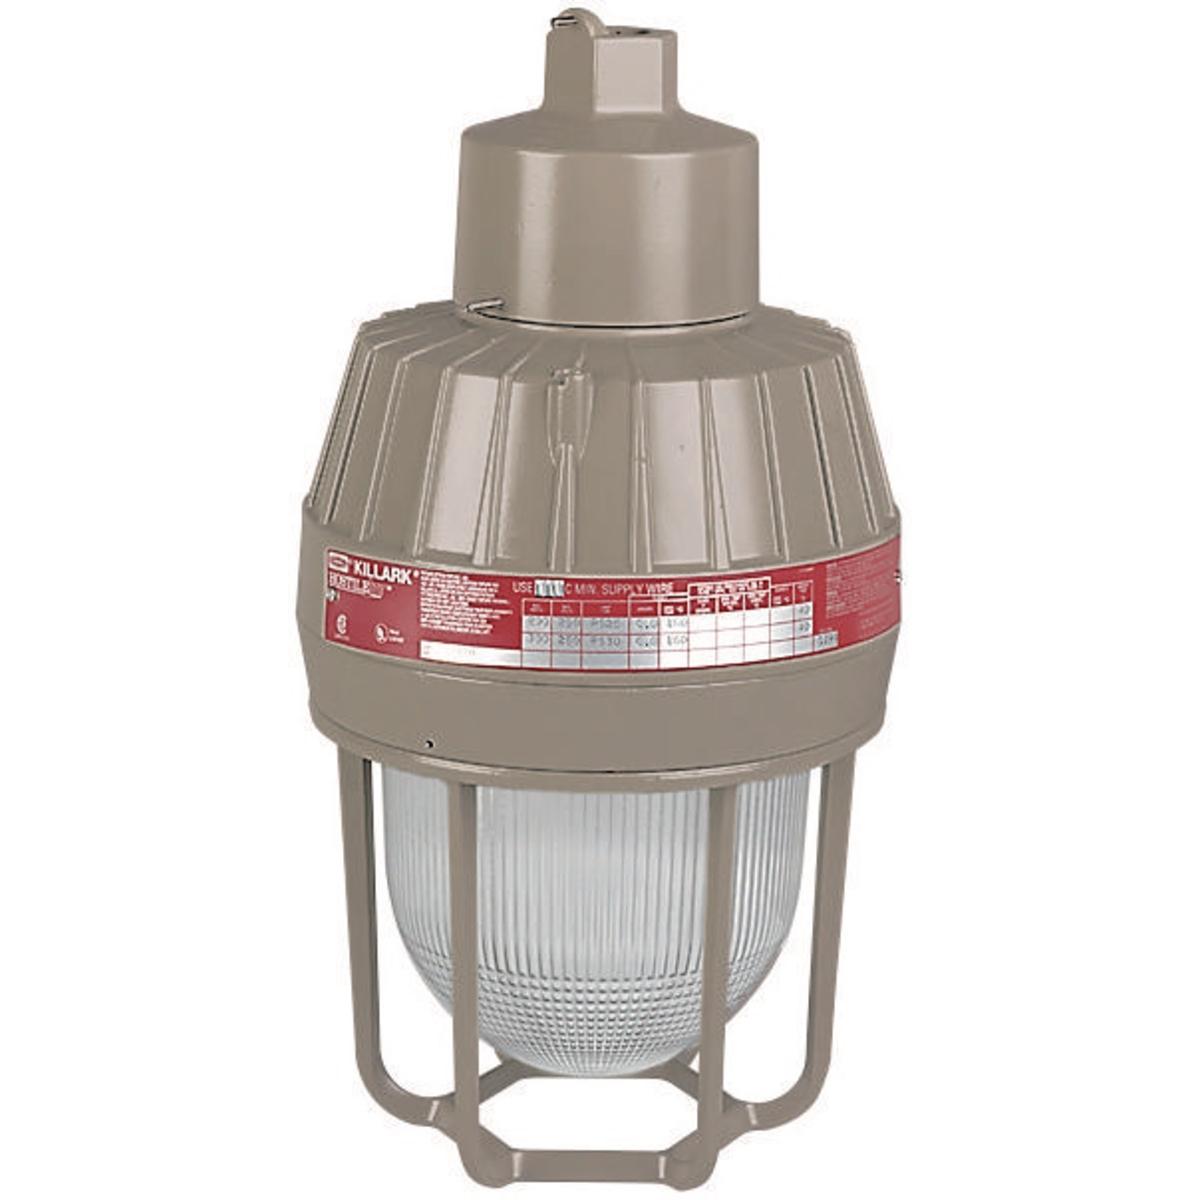 Hubbell EMS151A3G HID 150W Fluorescent 120V HPS 1" Pendant with Guard  ; Four light sources—Incandescent, compact fluorescent, high pressure sodium and metal halide ; Mounting choice—Pendant, ceiling, 25˚ stanchion or 90˚ wall mount, all with “wireless” design that allows 